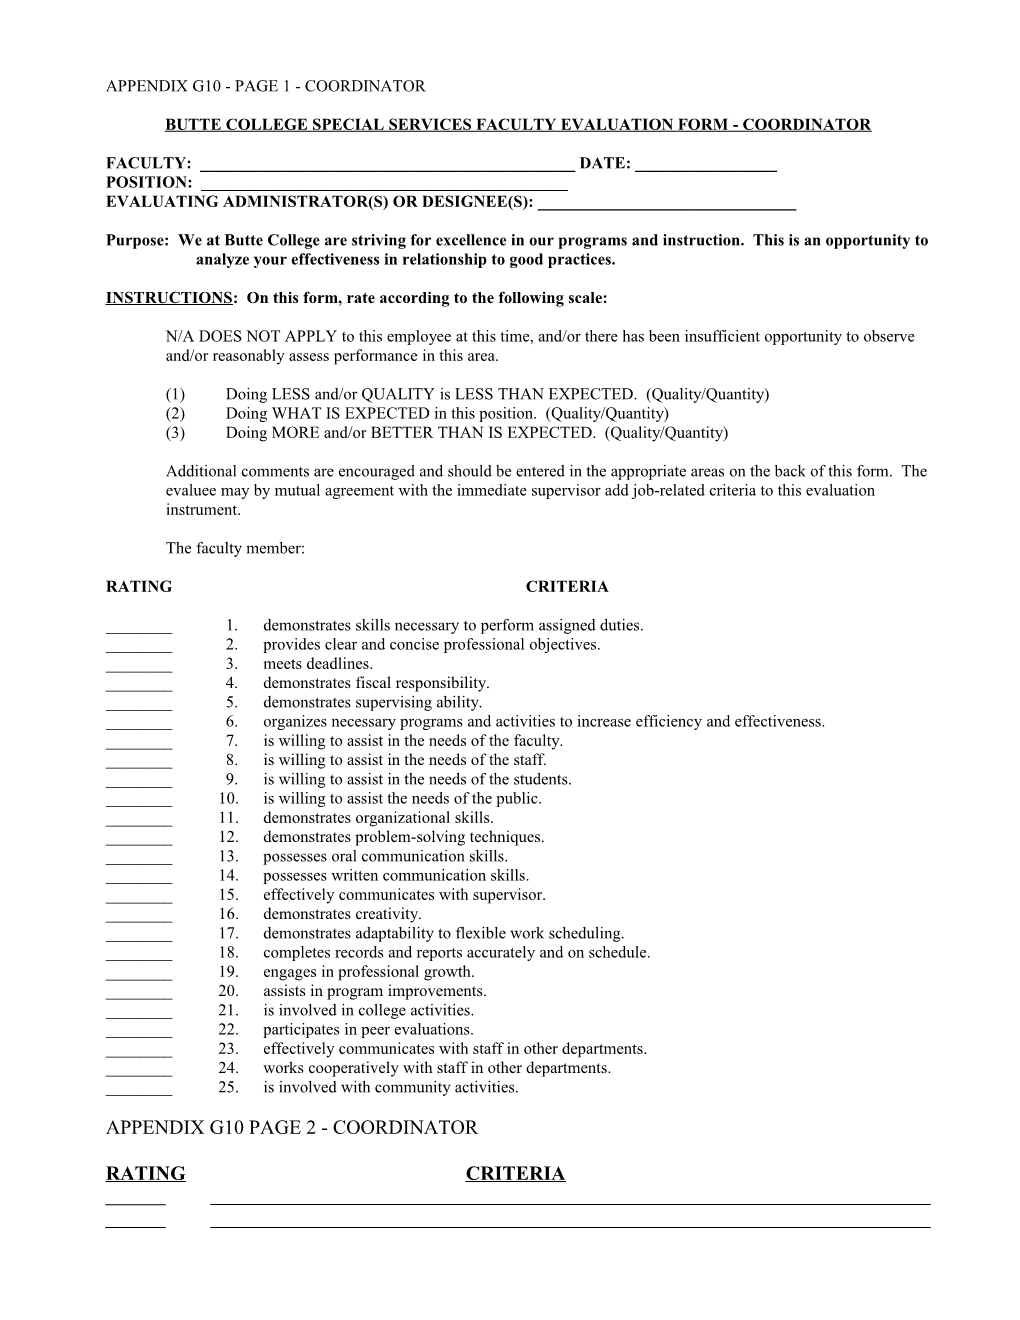 Buttecollege Special Services Faculty Evaluation Form - Coordinator